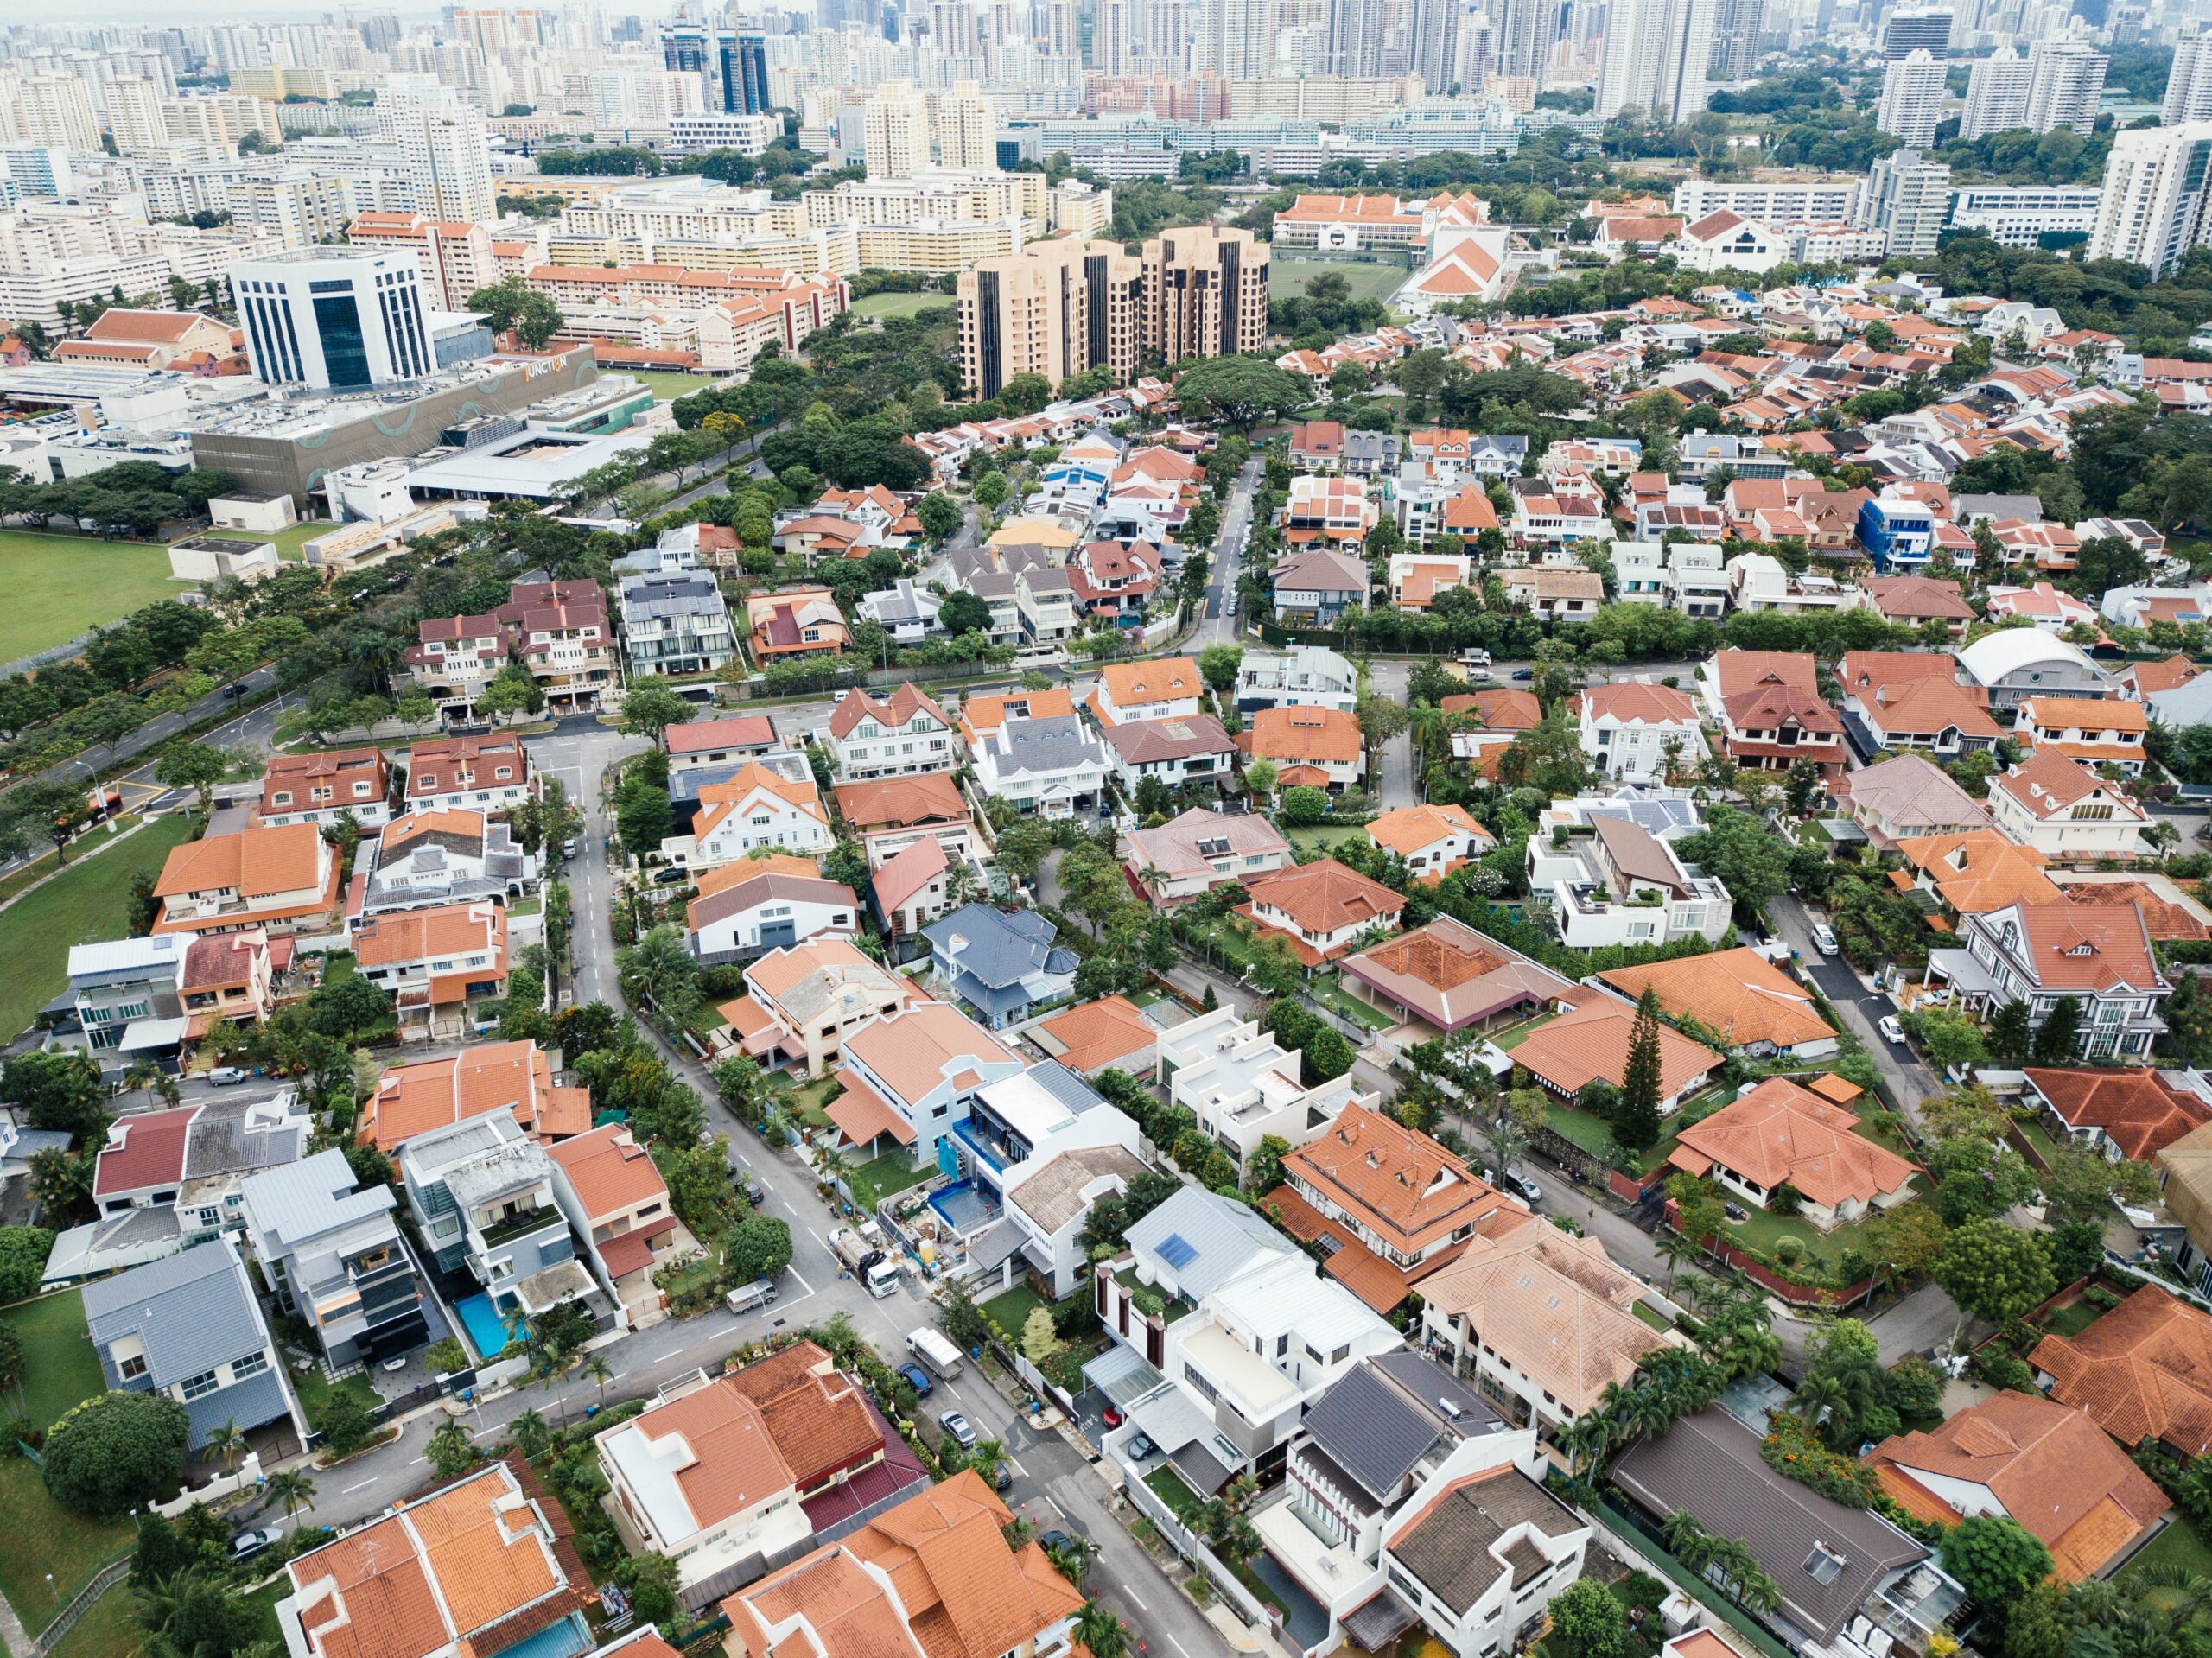 Aerial view of houses and apartment buildings in a residential neighborhood